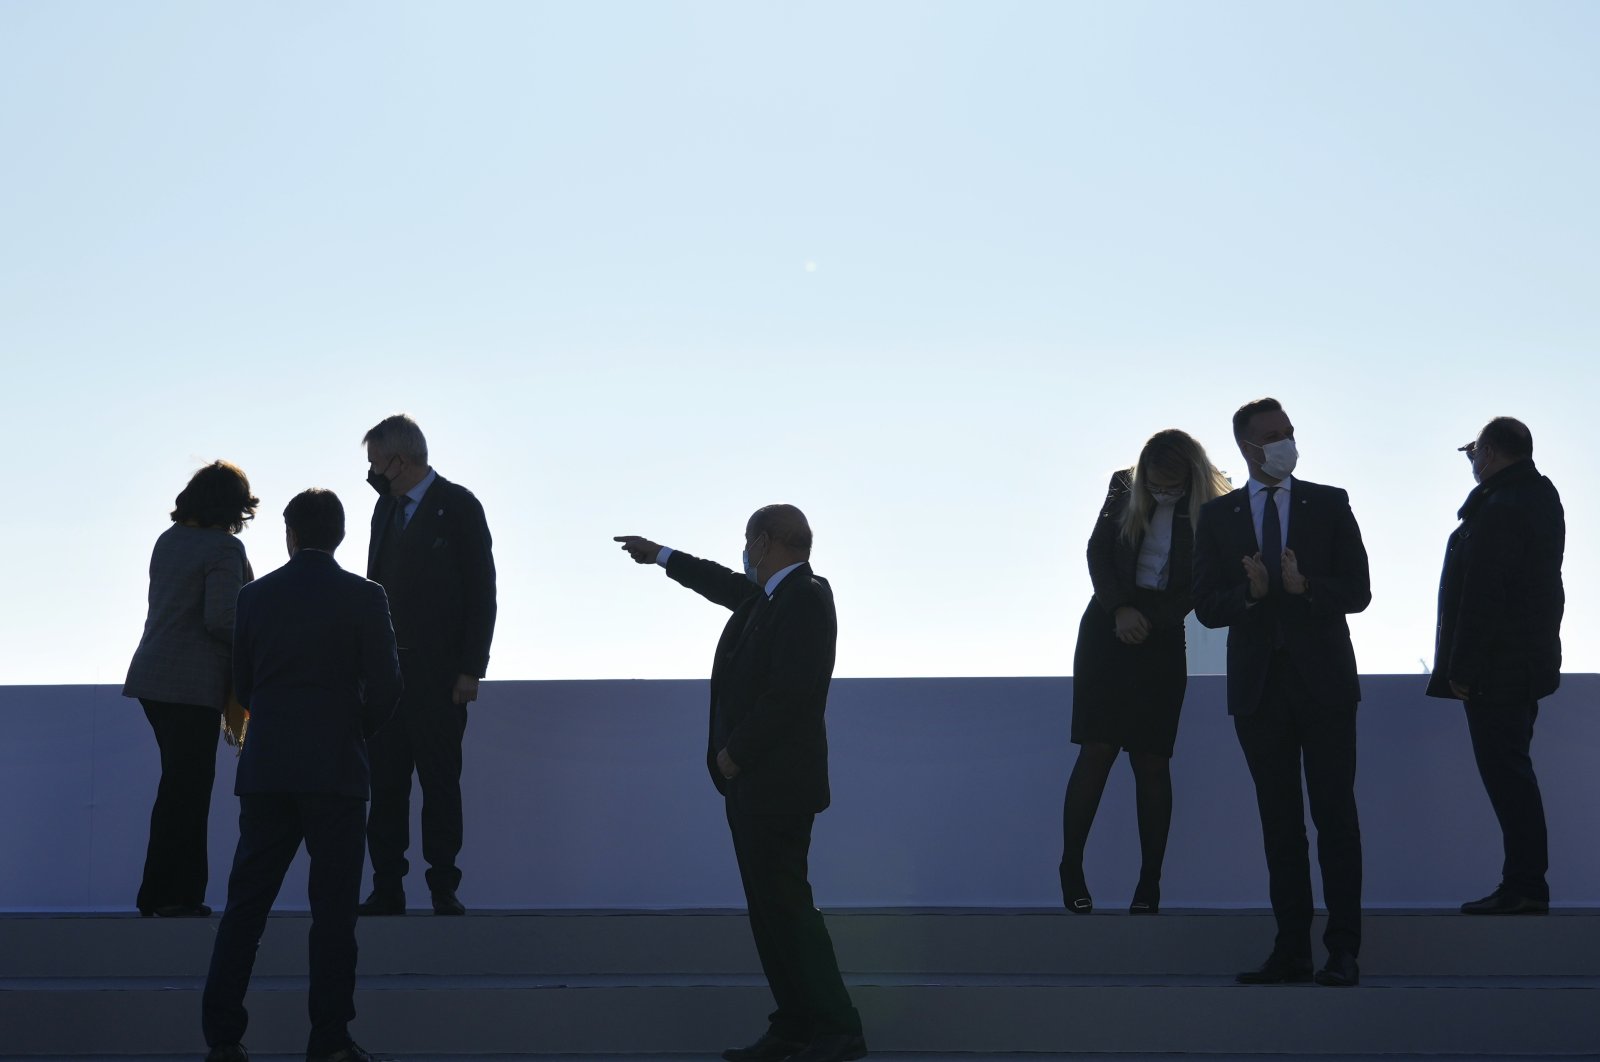 French Foreign Minister Jean-Yves Le Drian, center, gestures as he arrives for a group photo of European Union foreign ministers in Brest, France, Jan. 14, 2022. (AP Photo)